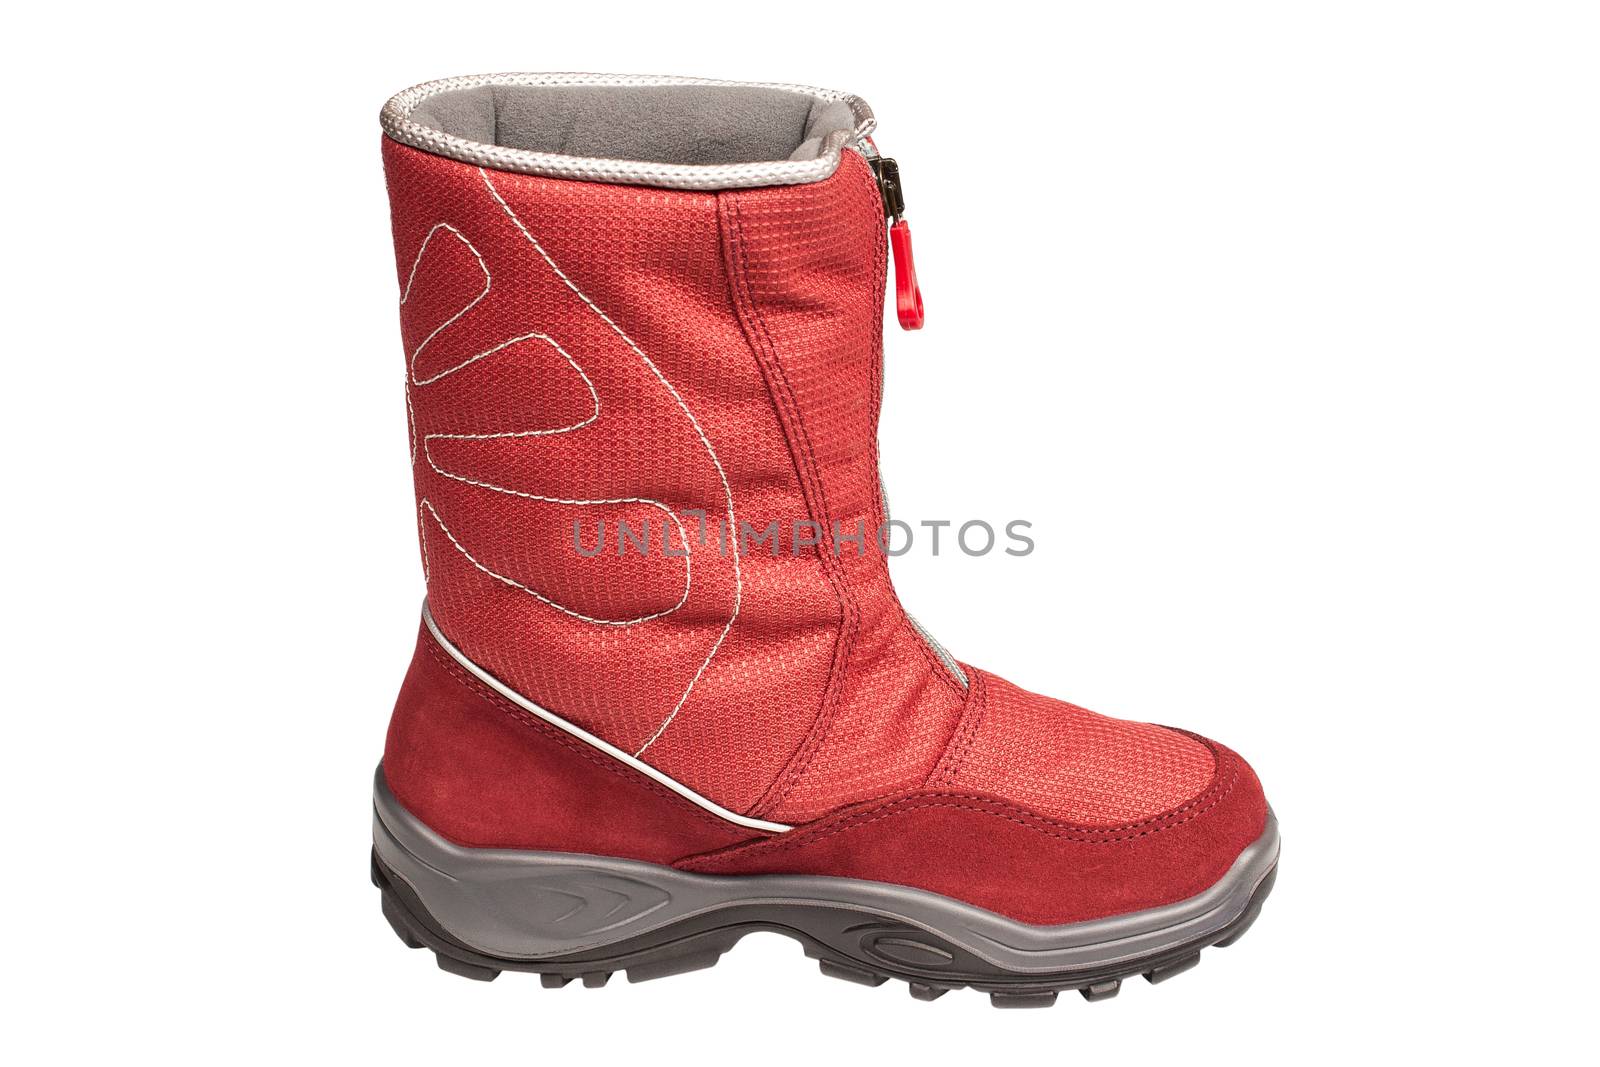 one children's red waterproof boot on a white background